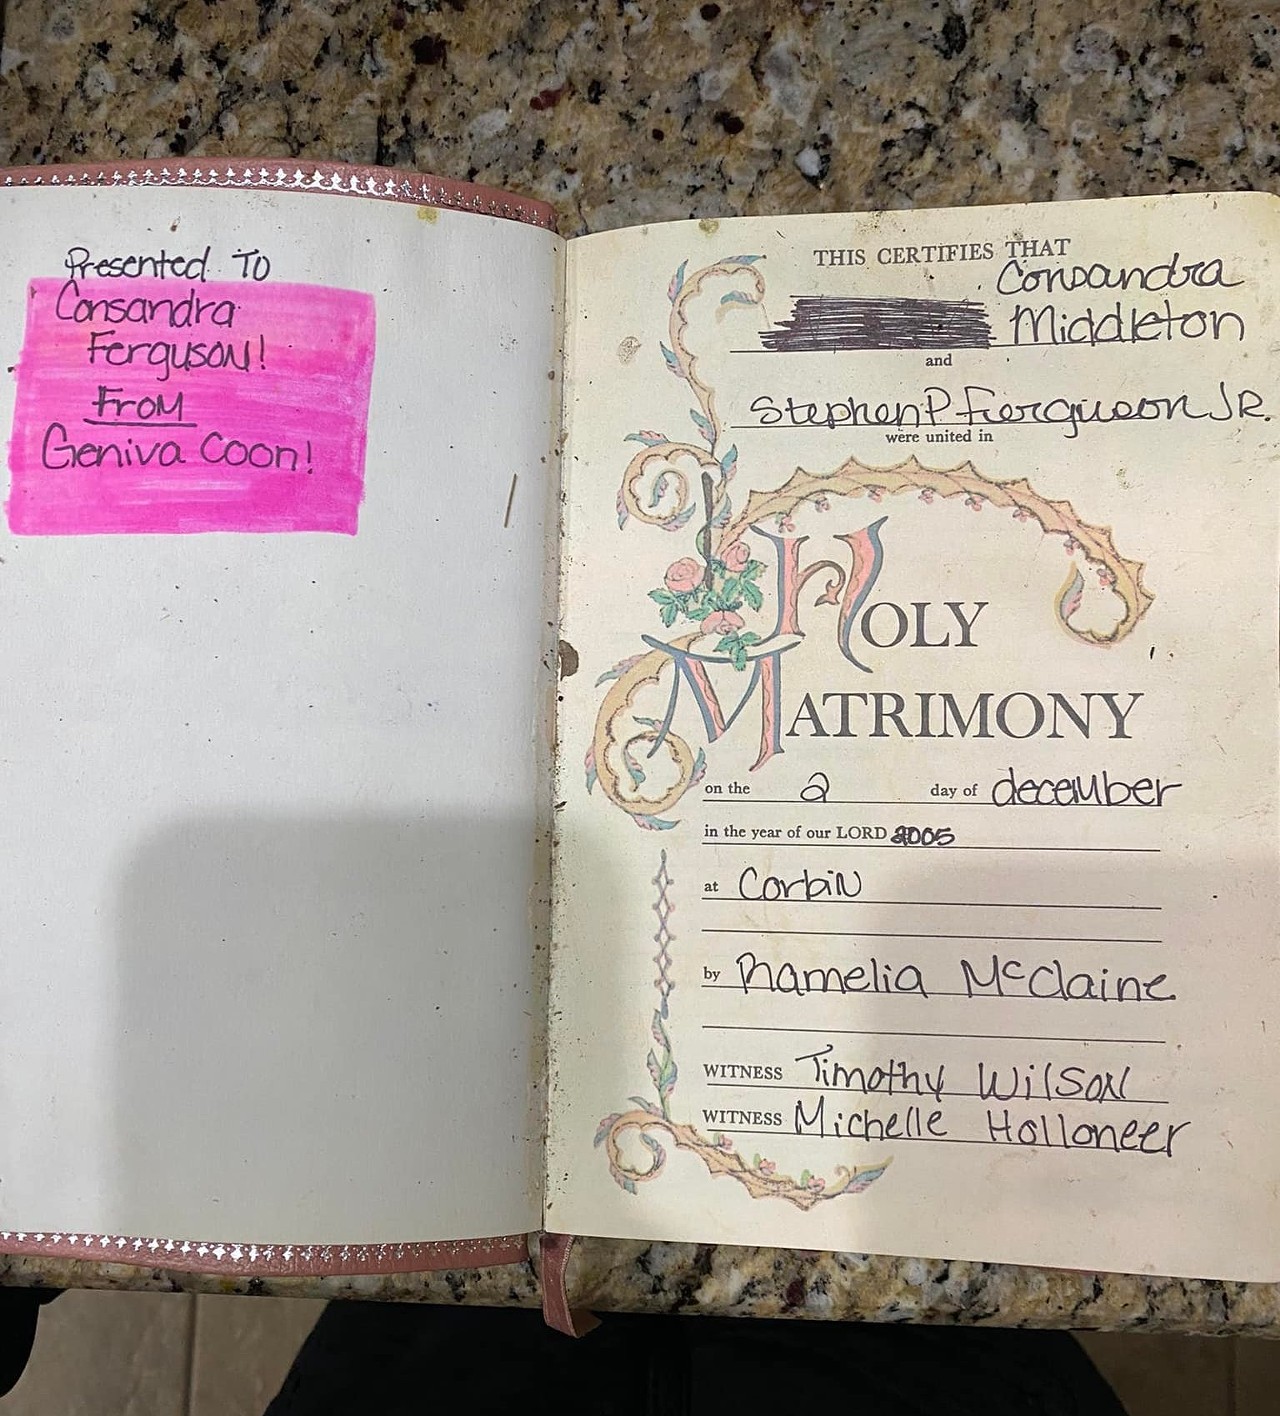 Found in Bremen, Kentucky
A pink Bible with a marriage certificate. No owner found yet. &#147;Feel free to message me and I&#146;d be glad to return them to their rightful owners.&#148;
Photo via Jessica Wellman